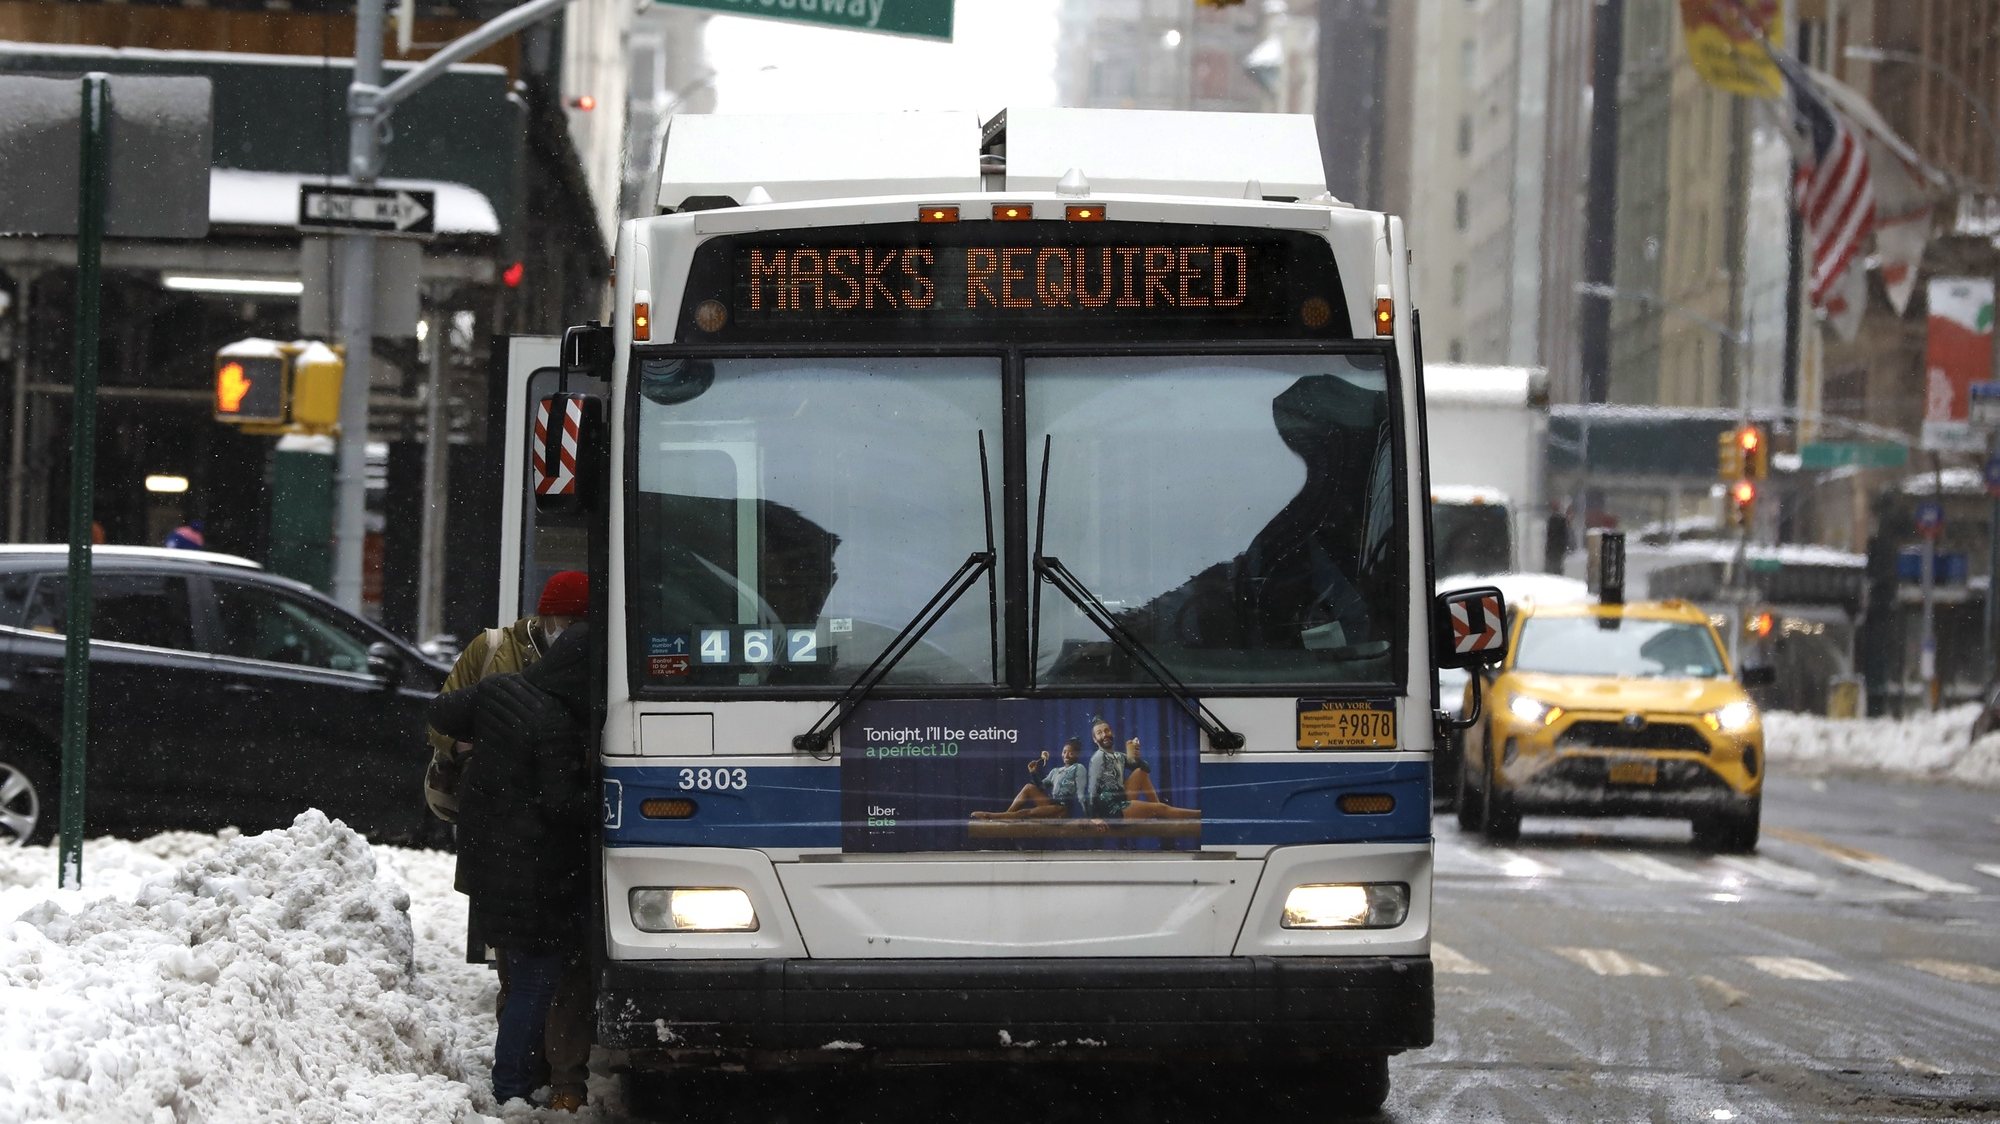 epaselect epa08982586 A New York City bus displays a sign requiring face masks at Columbus Circle in New York, New York, USA, 02 February 2021. The US Center for Disease Control has issued an order that requires face masks to be worn by all travelers while on public transportation (which includes all passengers and all personnel operating conveyances). People must wear masks that completely cover both the mouth and nose while awaiting, boarding, disembarking, or traveling on airplanes, ships, ferries, trains, subways, buses, taxis, and ride-shares as they are traveling into, within, or out of the United States and U.S. territories.  EPA/Peter Foley